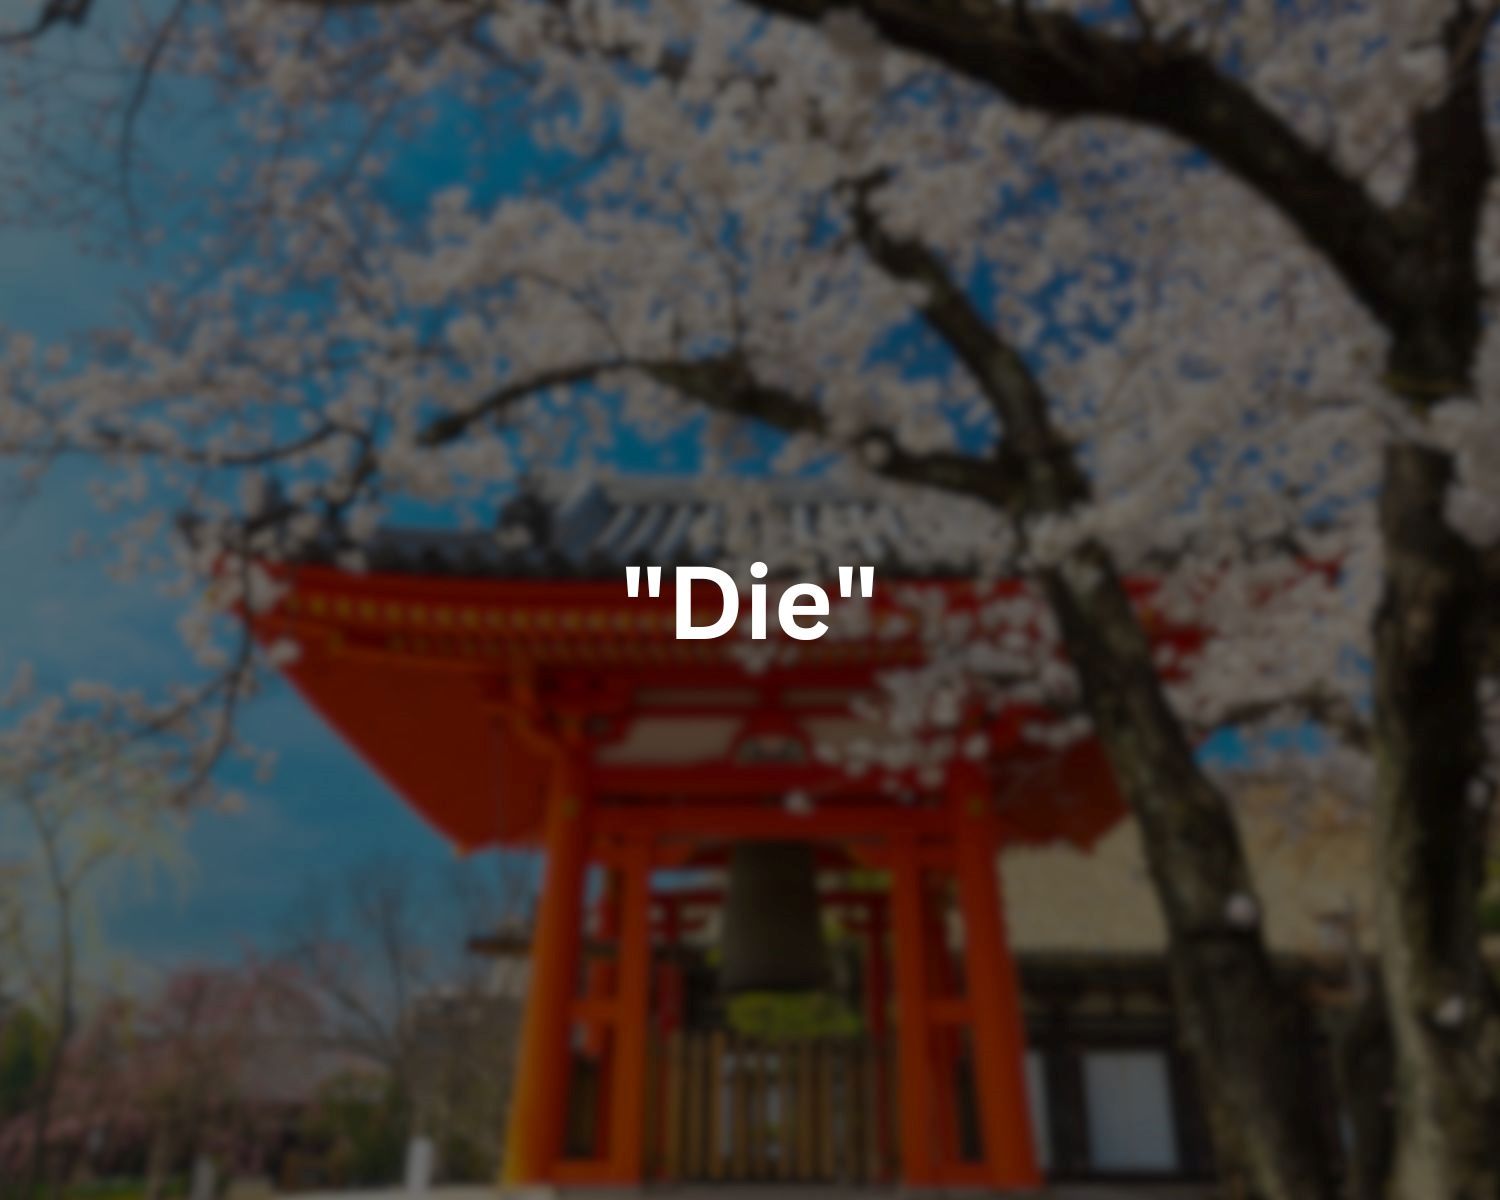 How To Write “Die” In Japanese And Discover Related Words